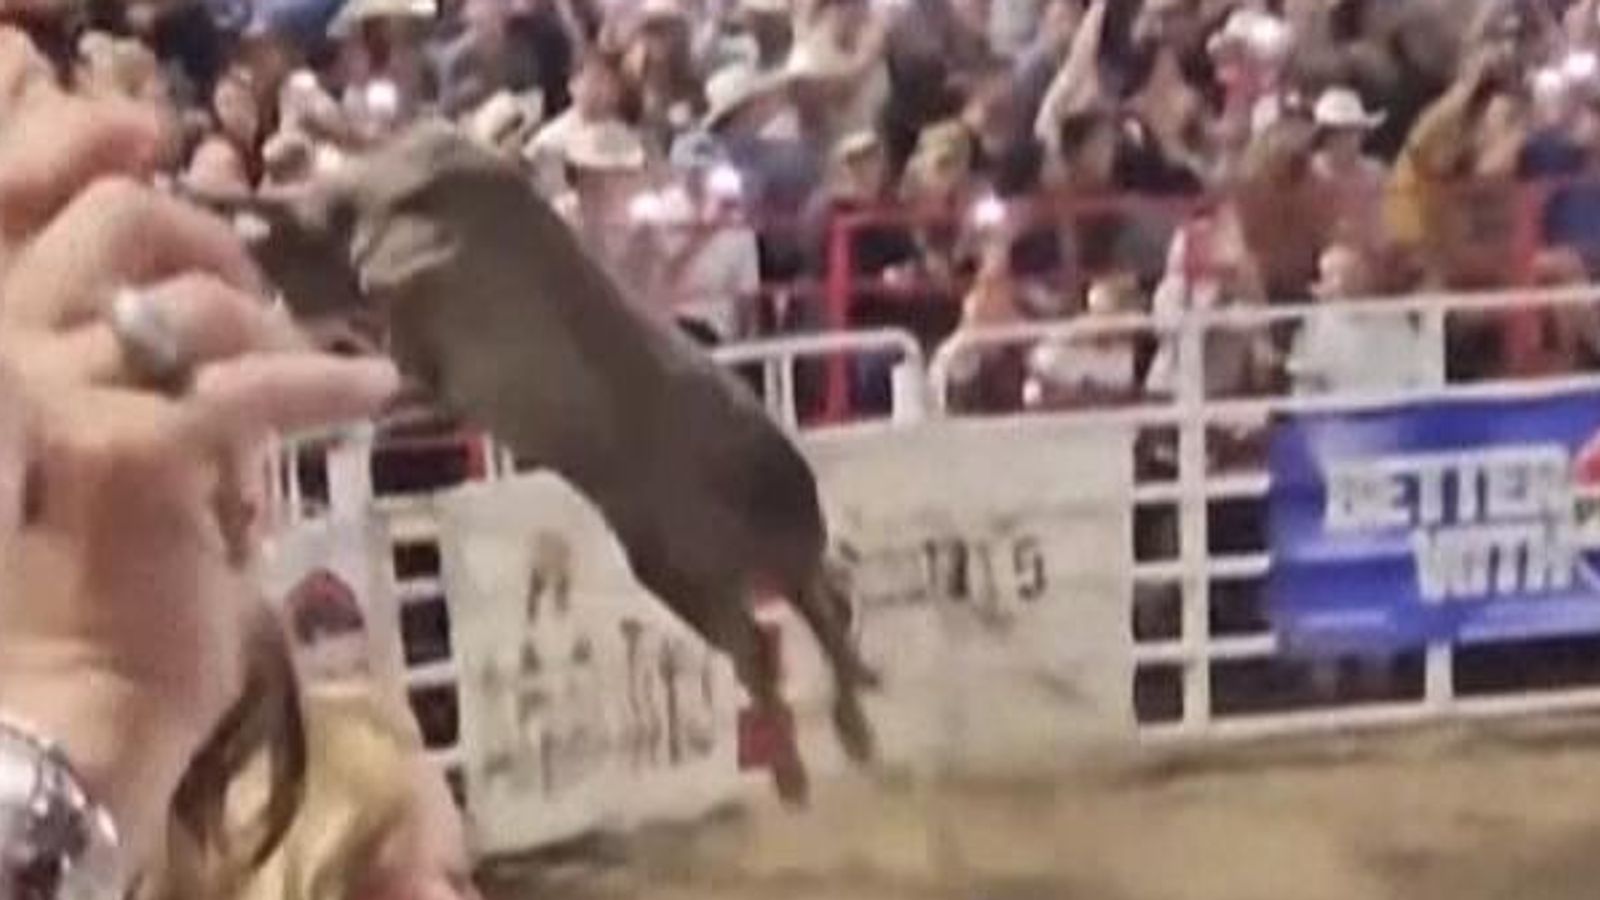 Rodeo bull charges into spectators after leaping over fence